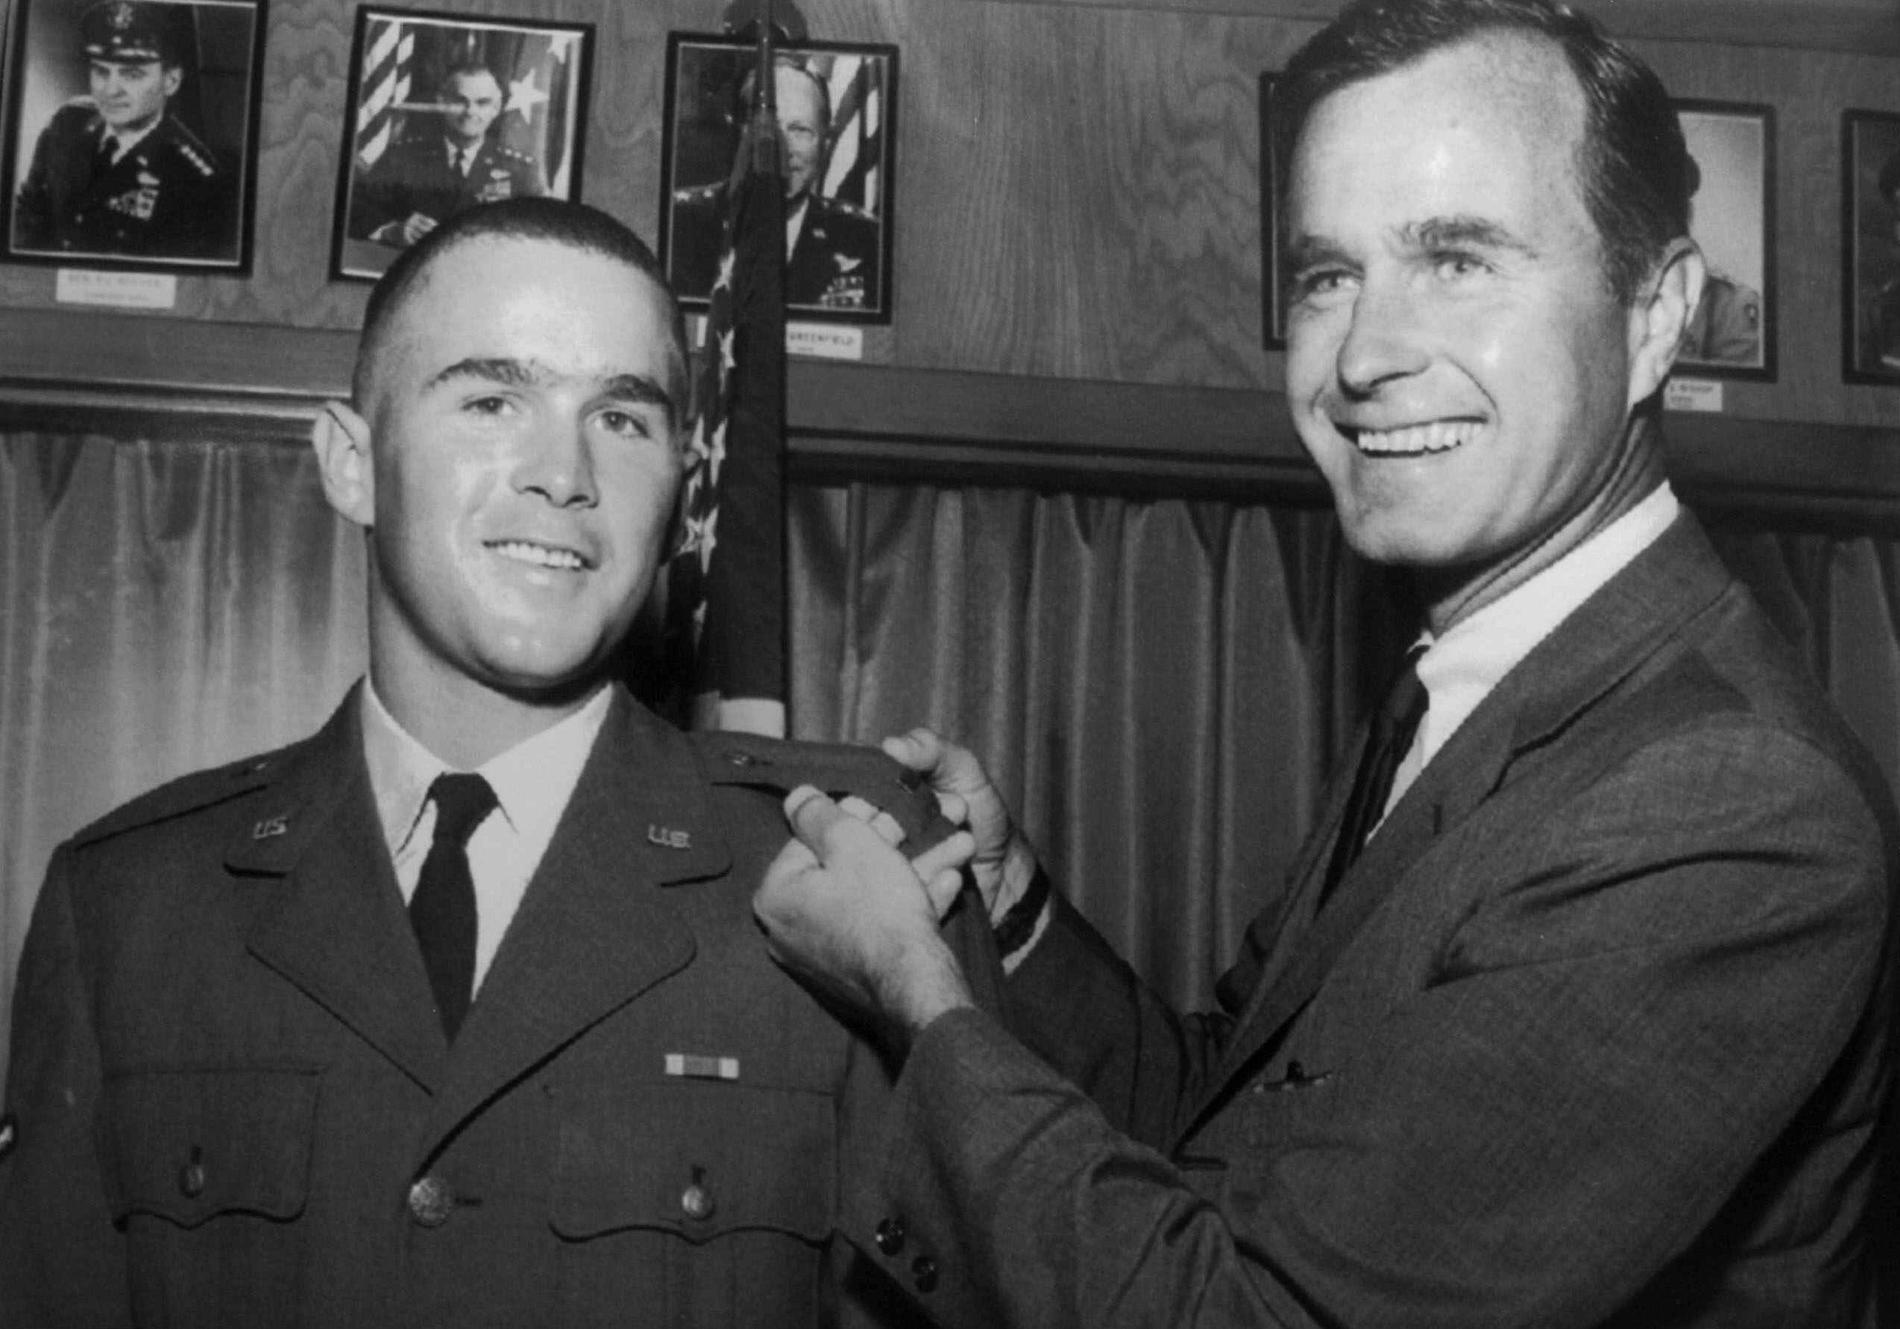 n this 1968 file photo provided by the Texas National Guard, George H.W. Bush, right, is about to pin a lieutenant bar on his son, George W. Bush, after the younger Bush was made an officer in the Texas Air National Guard in Ellington Field, Texas. Bush died at the age of 94 on Friday, Nov. 30, 2018, about eight months after the death of his wife, Barbara Bush.